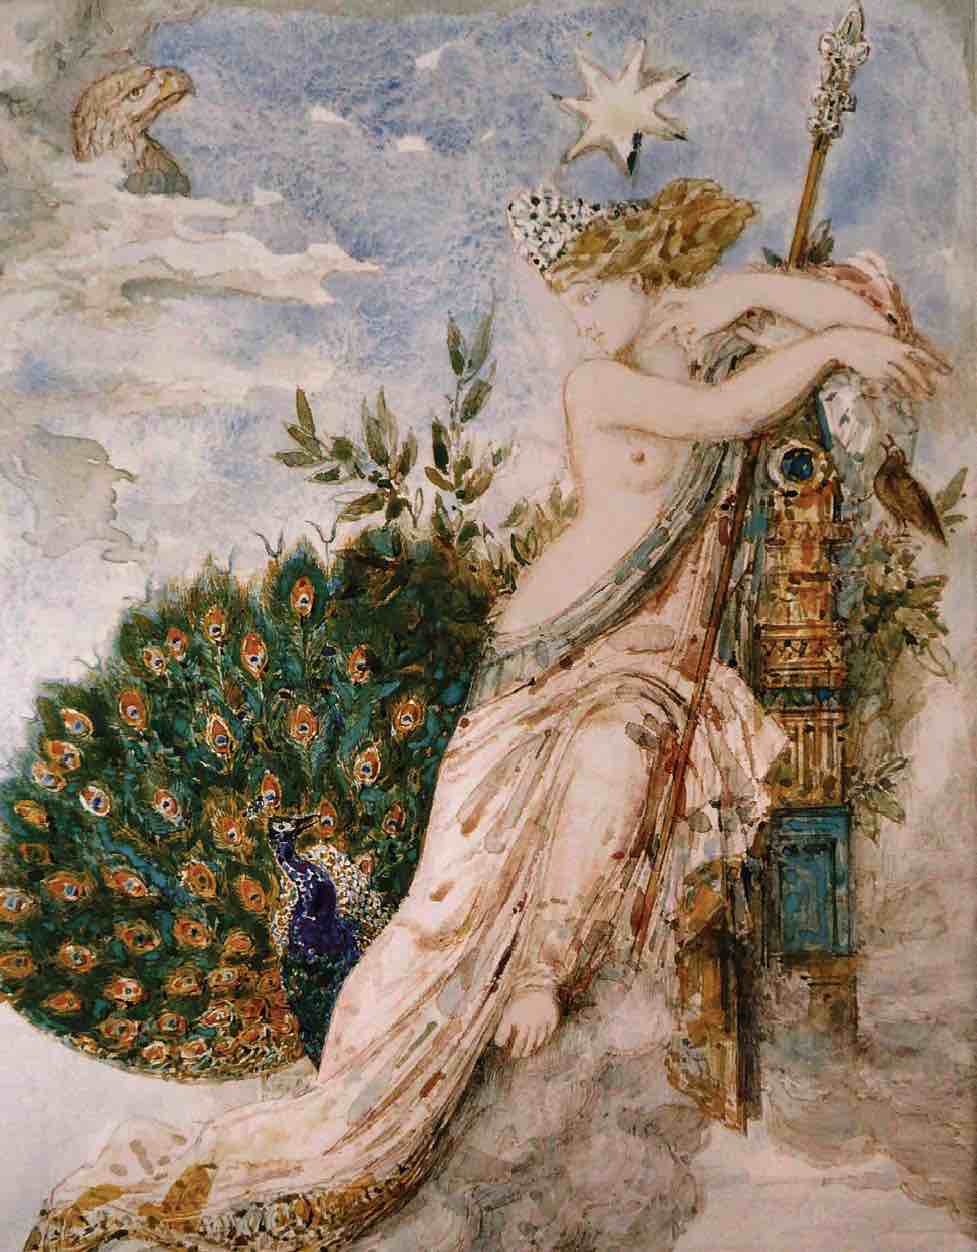 The Peacock Complaining to Juno (1881), by Gustave Moreau